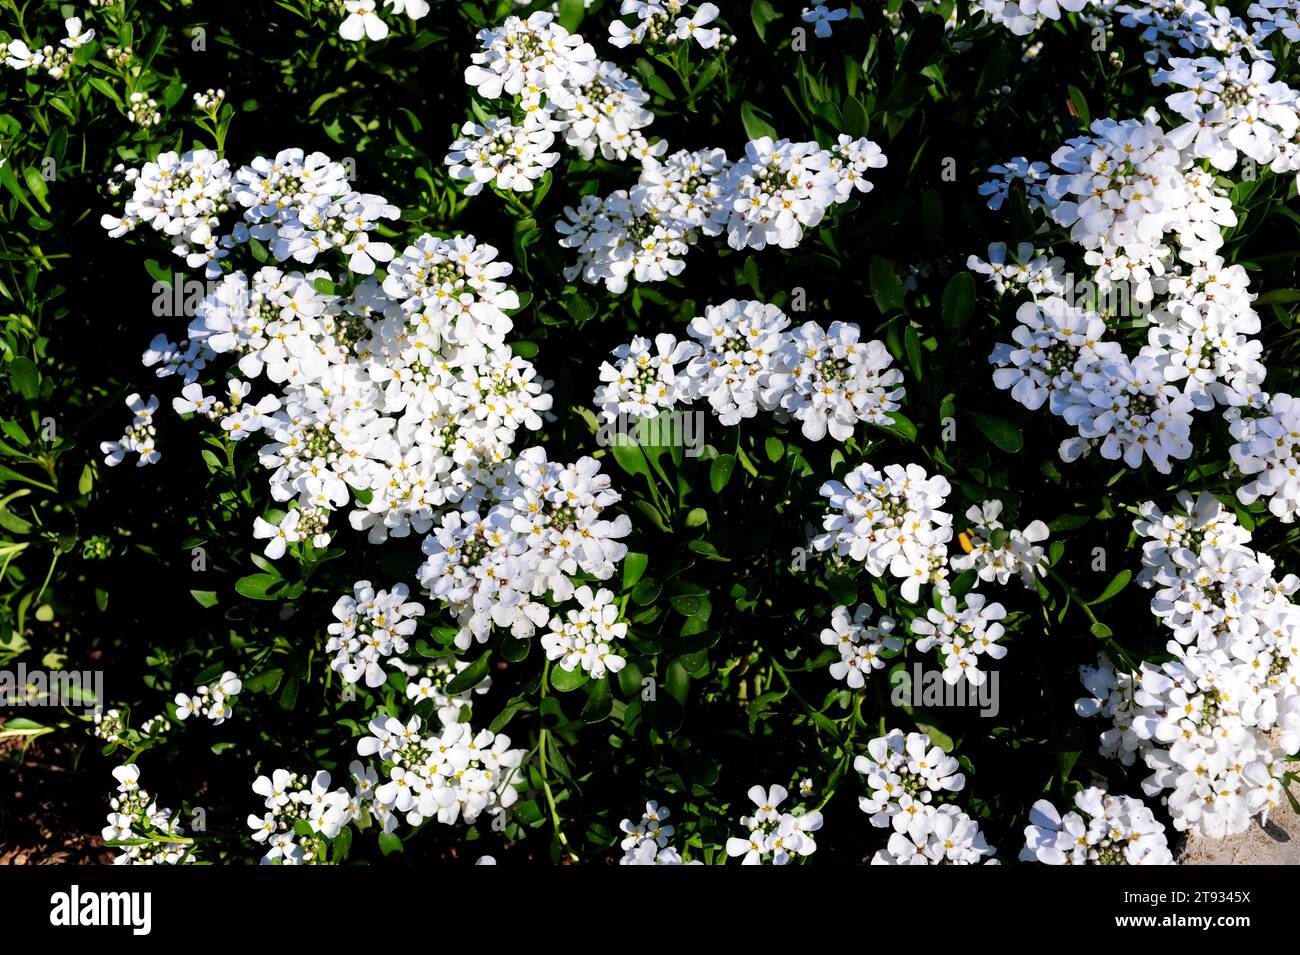 Iberis semperflorens is an ornamental herb of the Brassicaceae family. Stock Photo